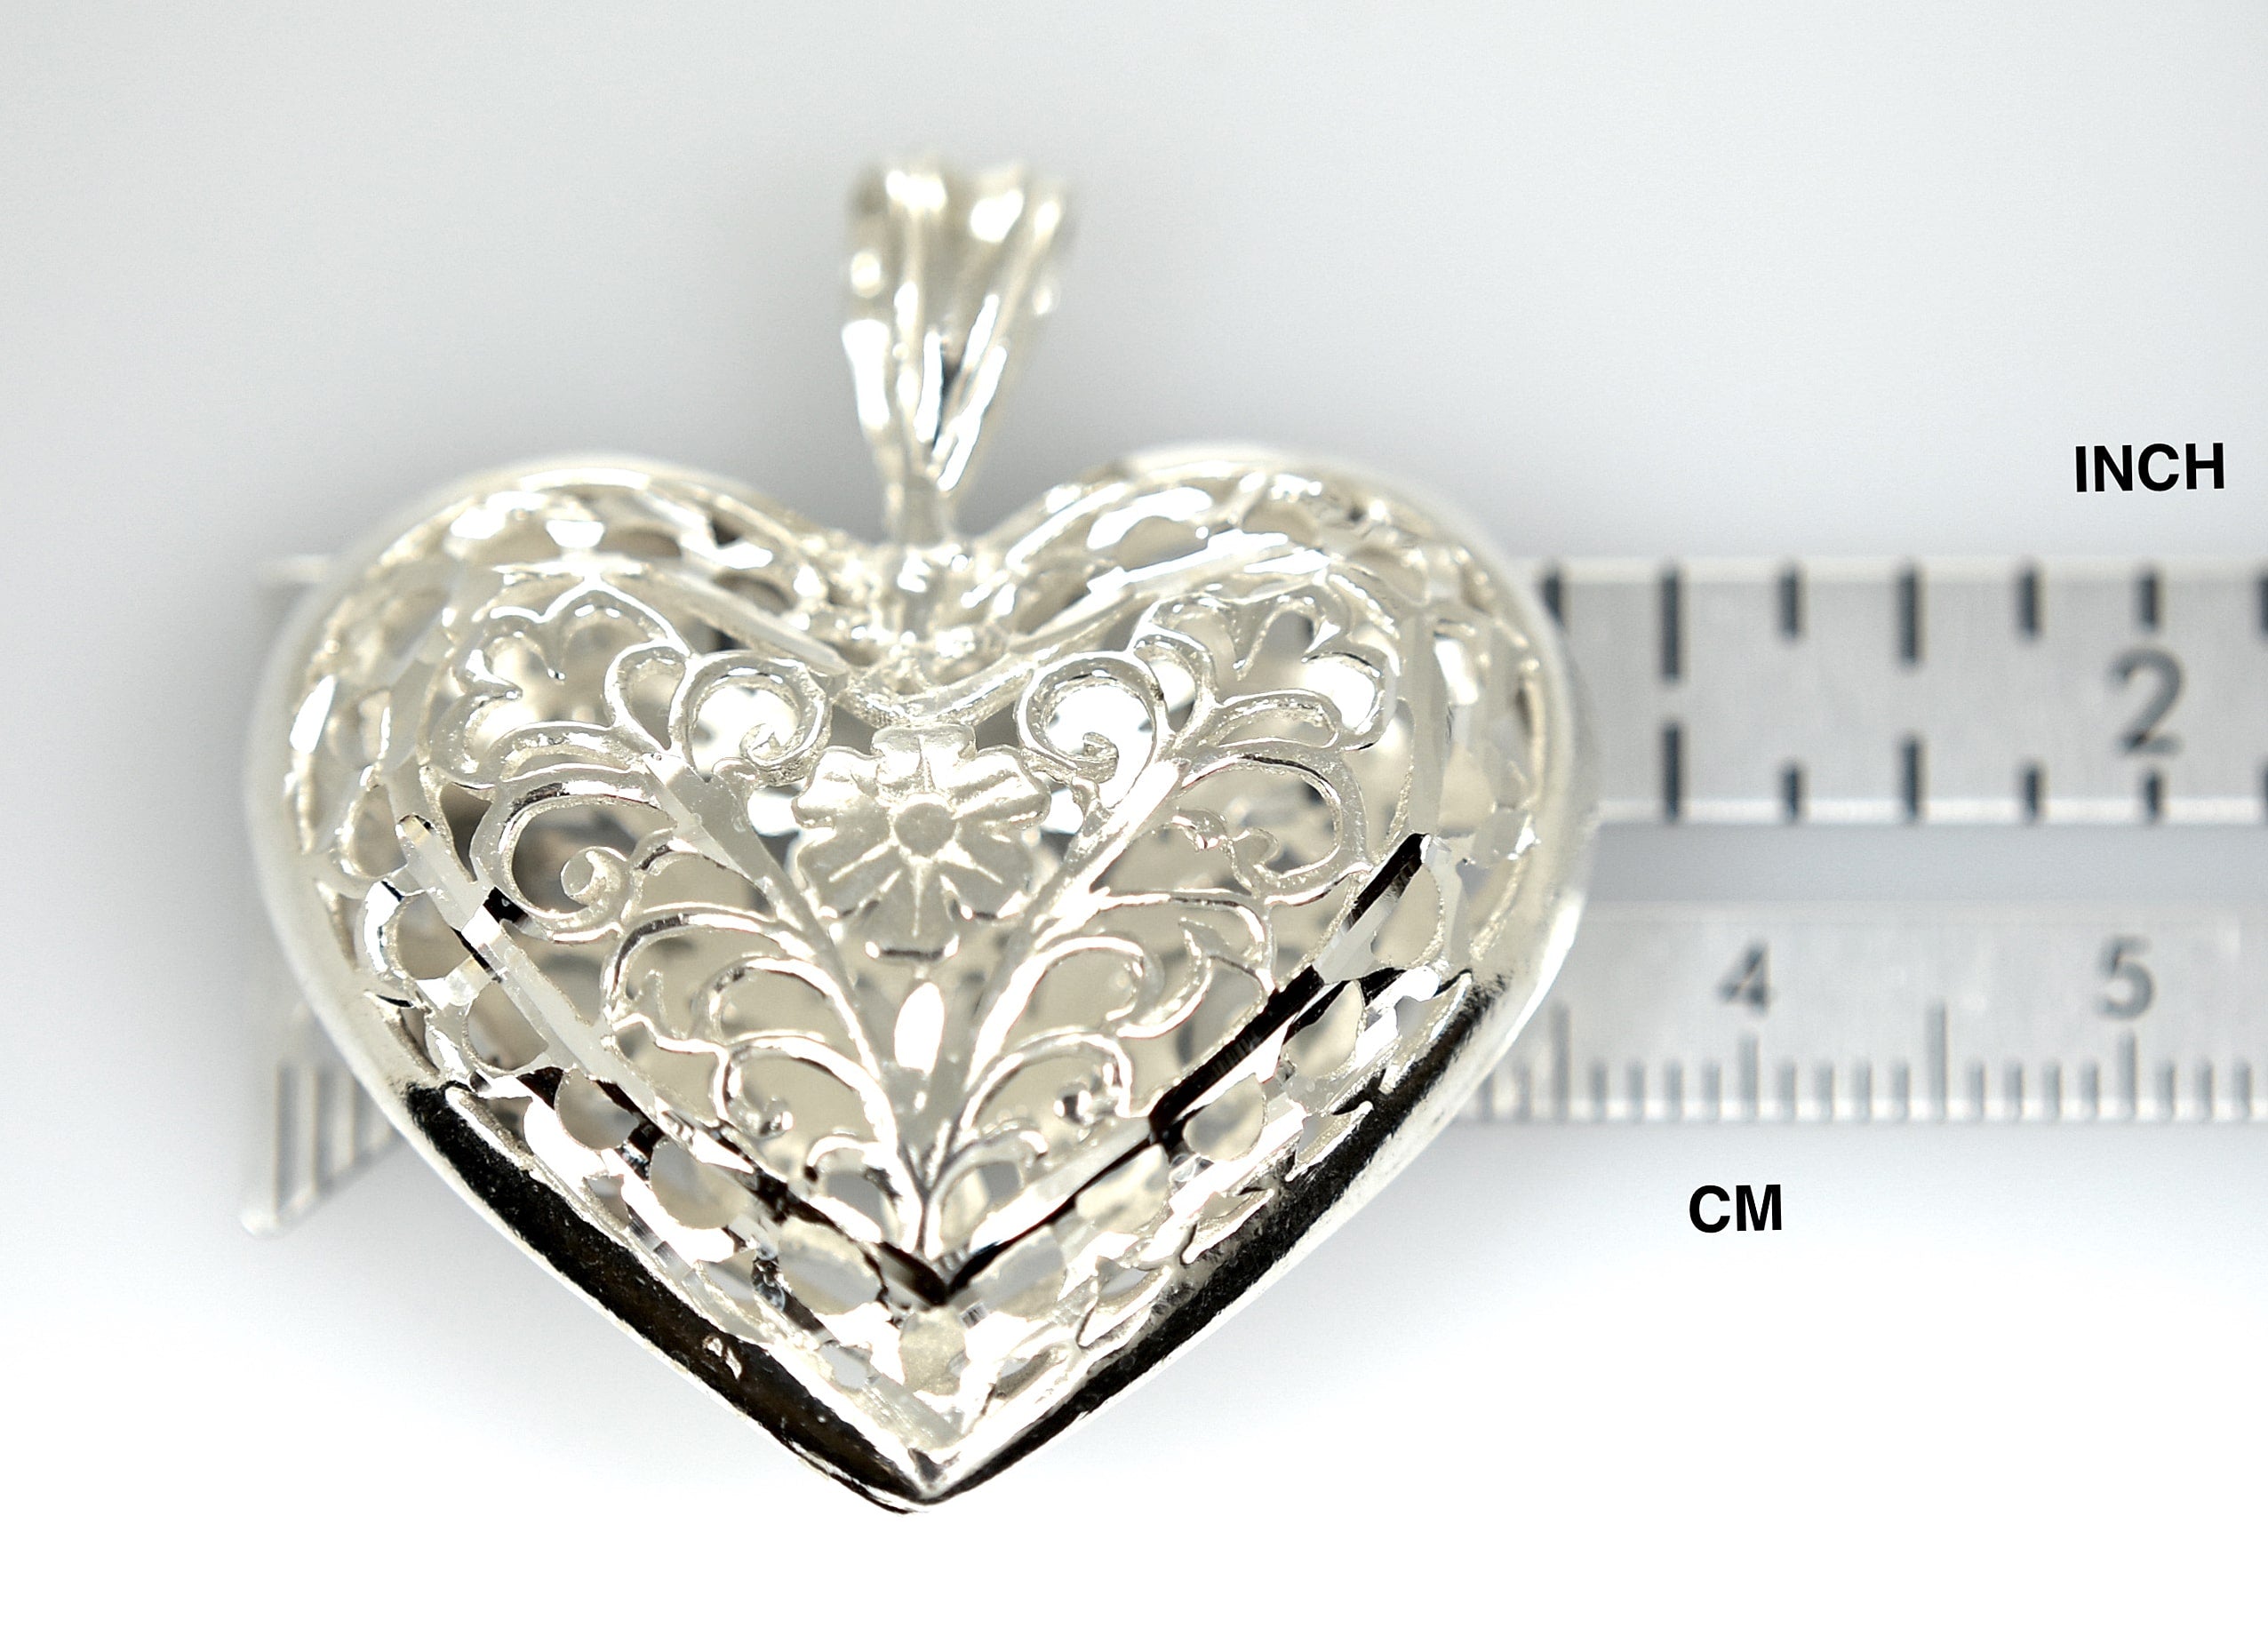 Sterling Silver Puffy Filigree Heart 3D Large Pendant Charm